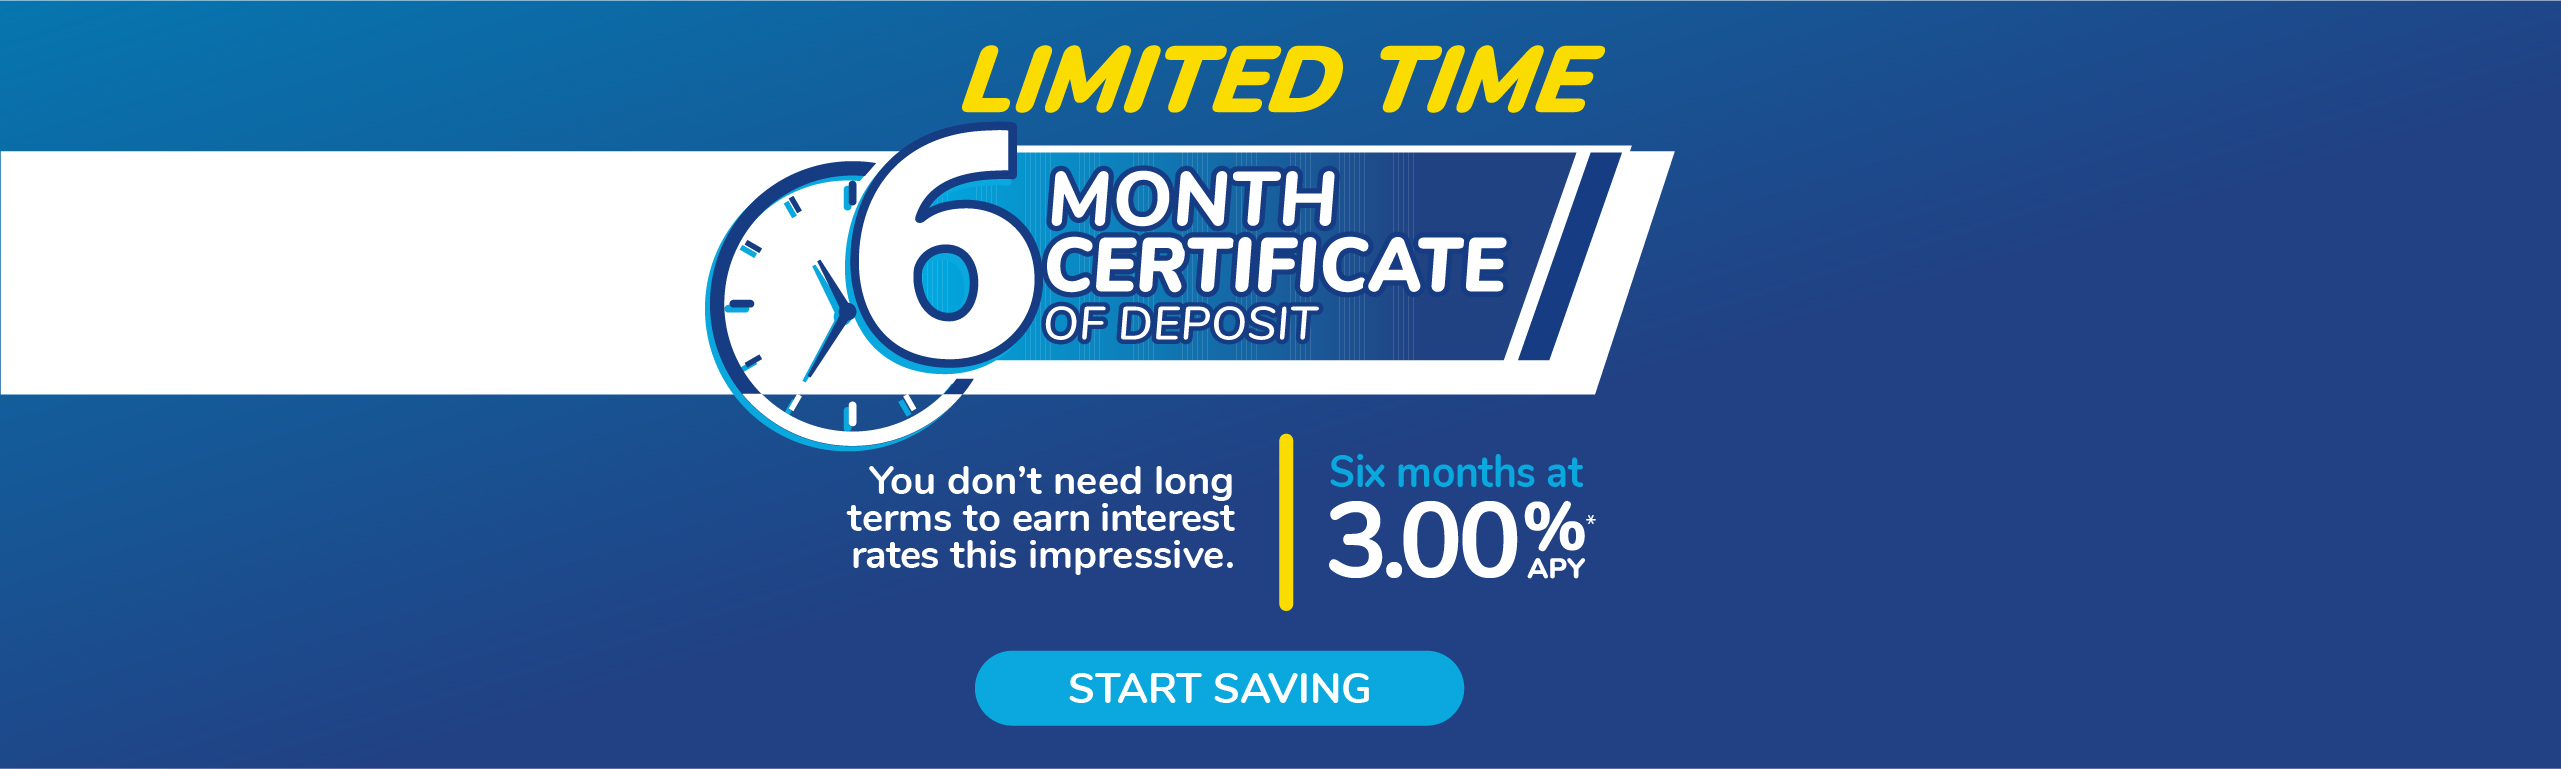 LIMITED TIME: 6 Month Certificate of Deposit for 3% APY